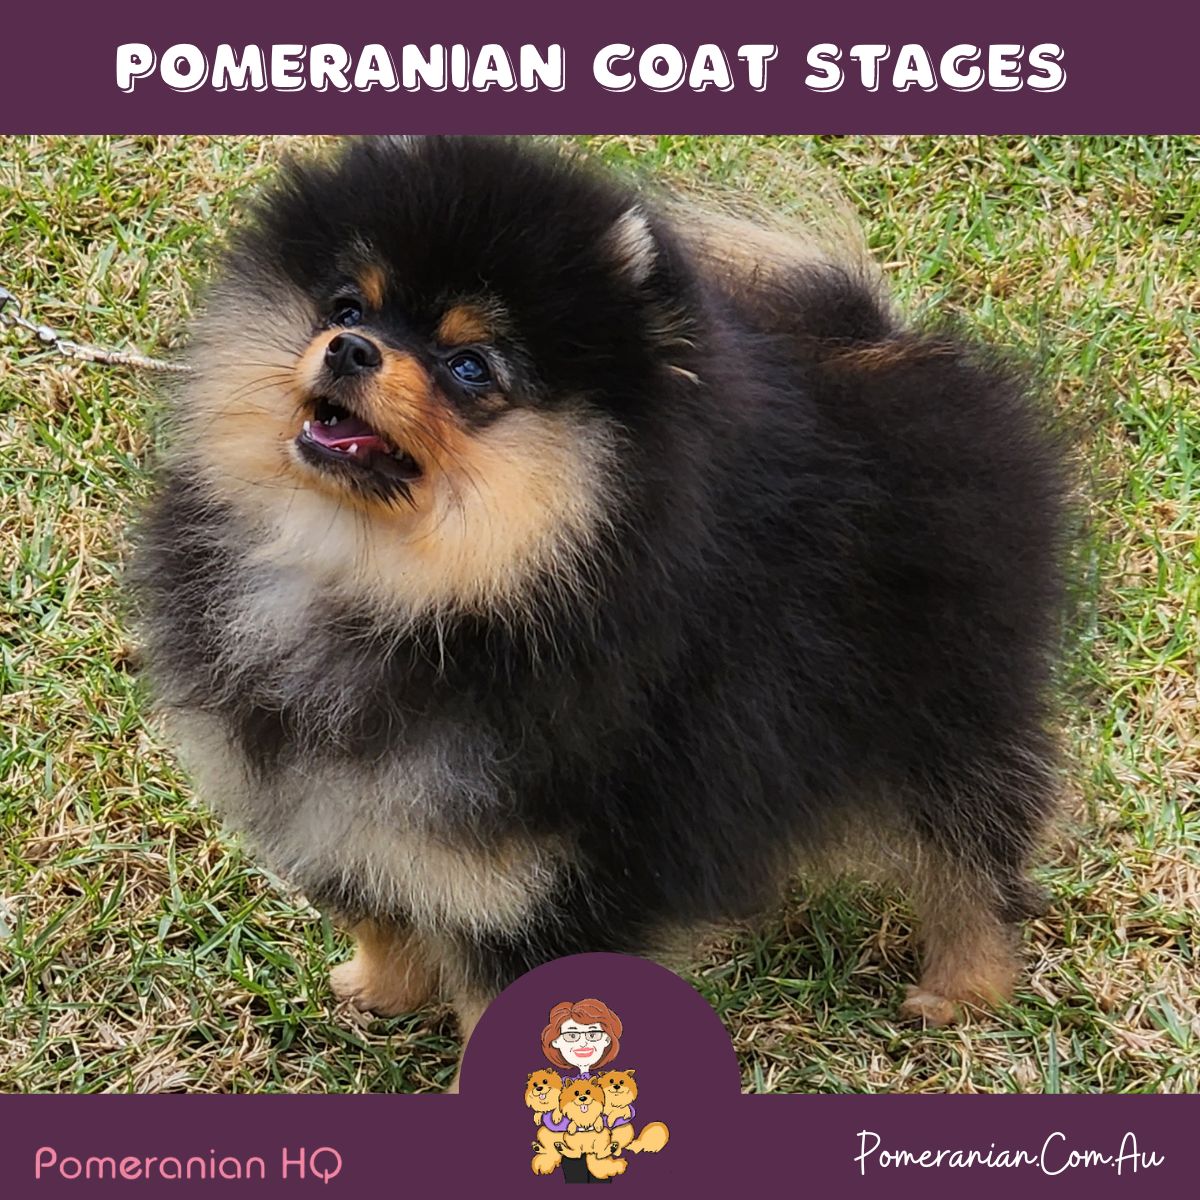 What Are the Different Pomeranian Coat Stages?